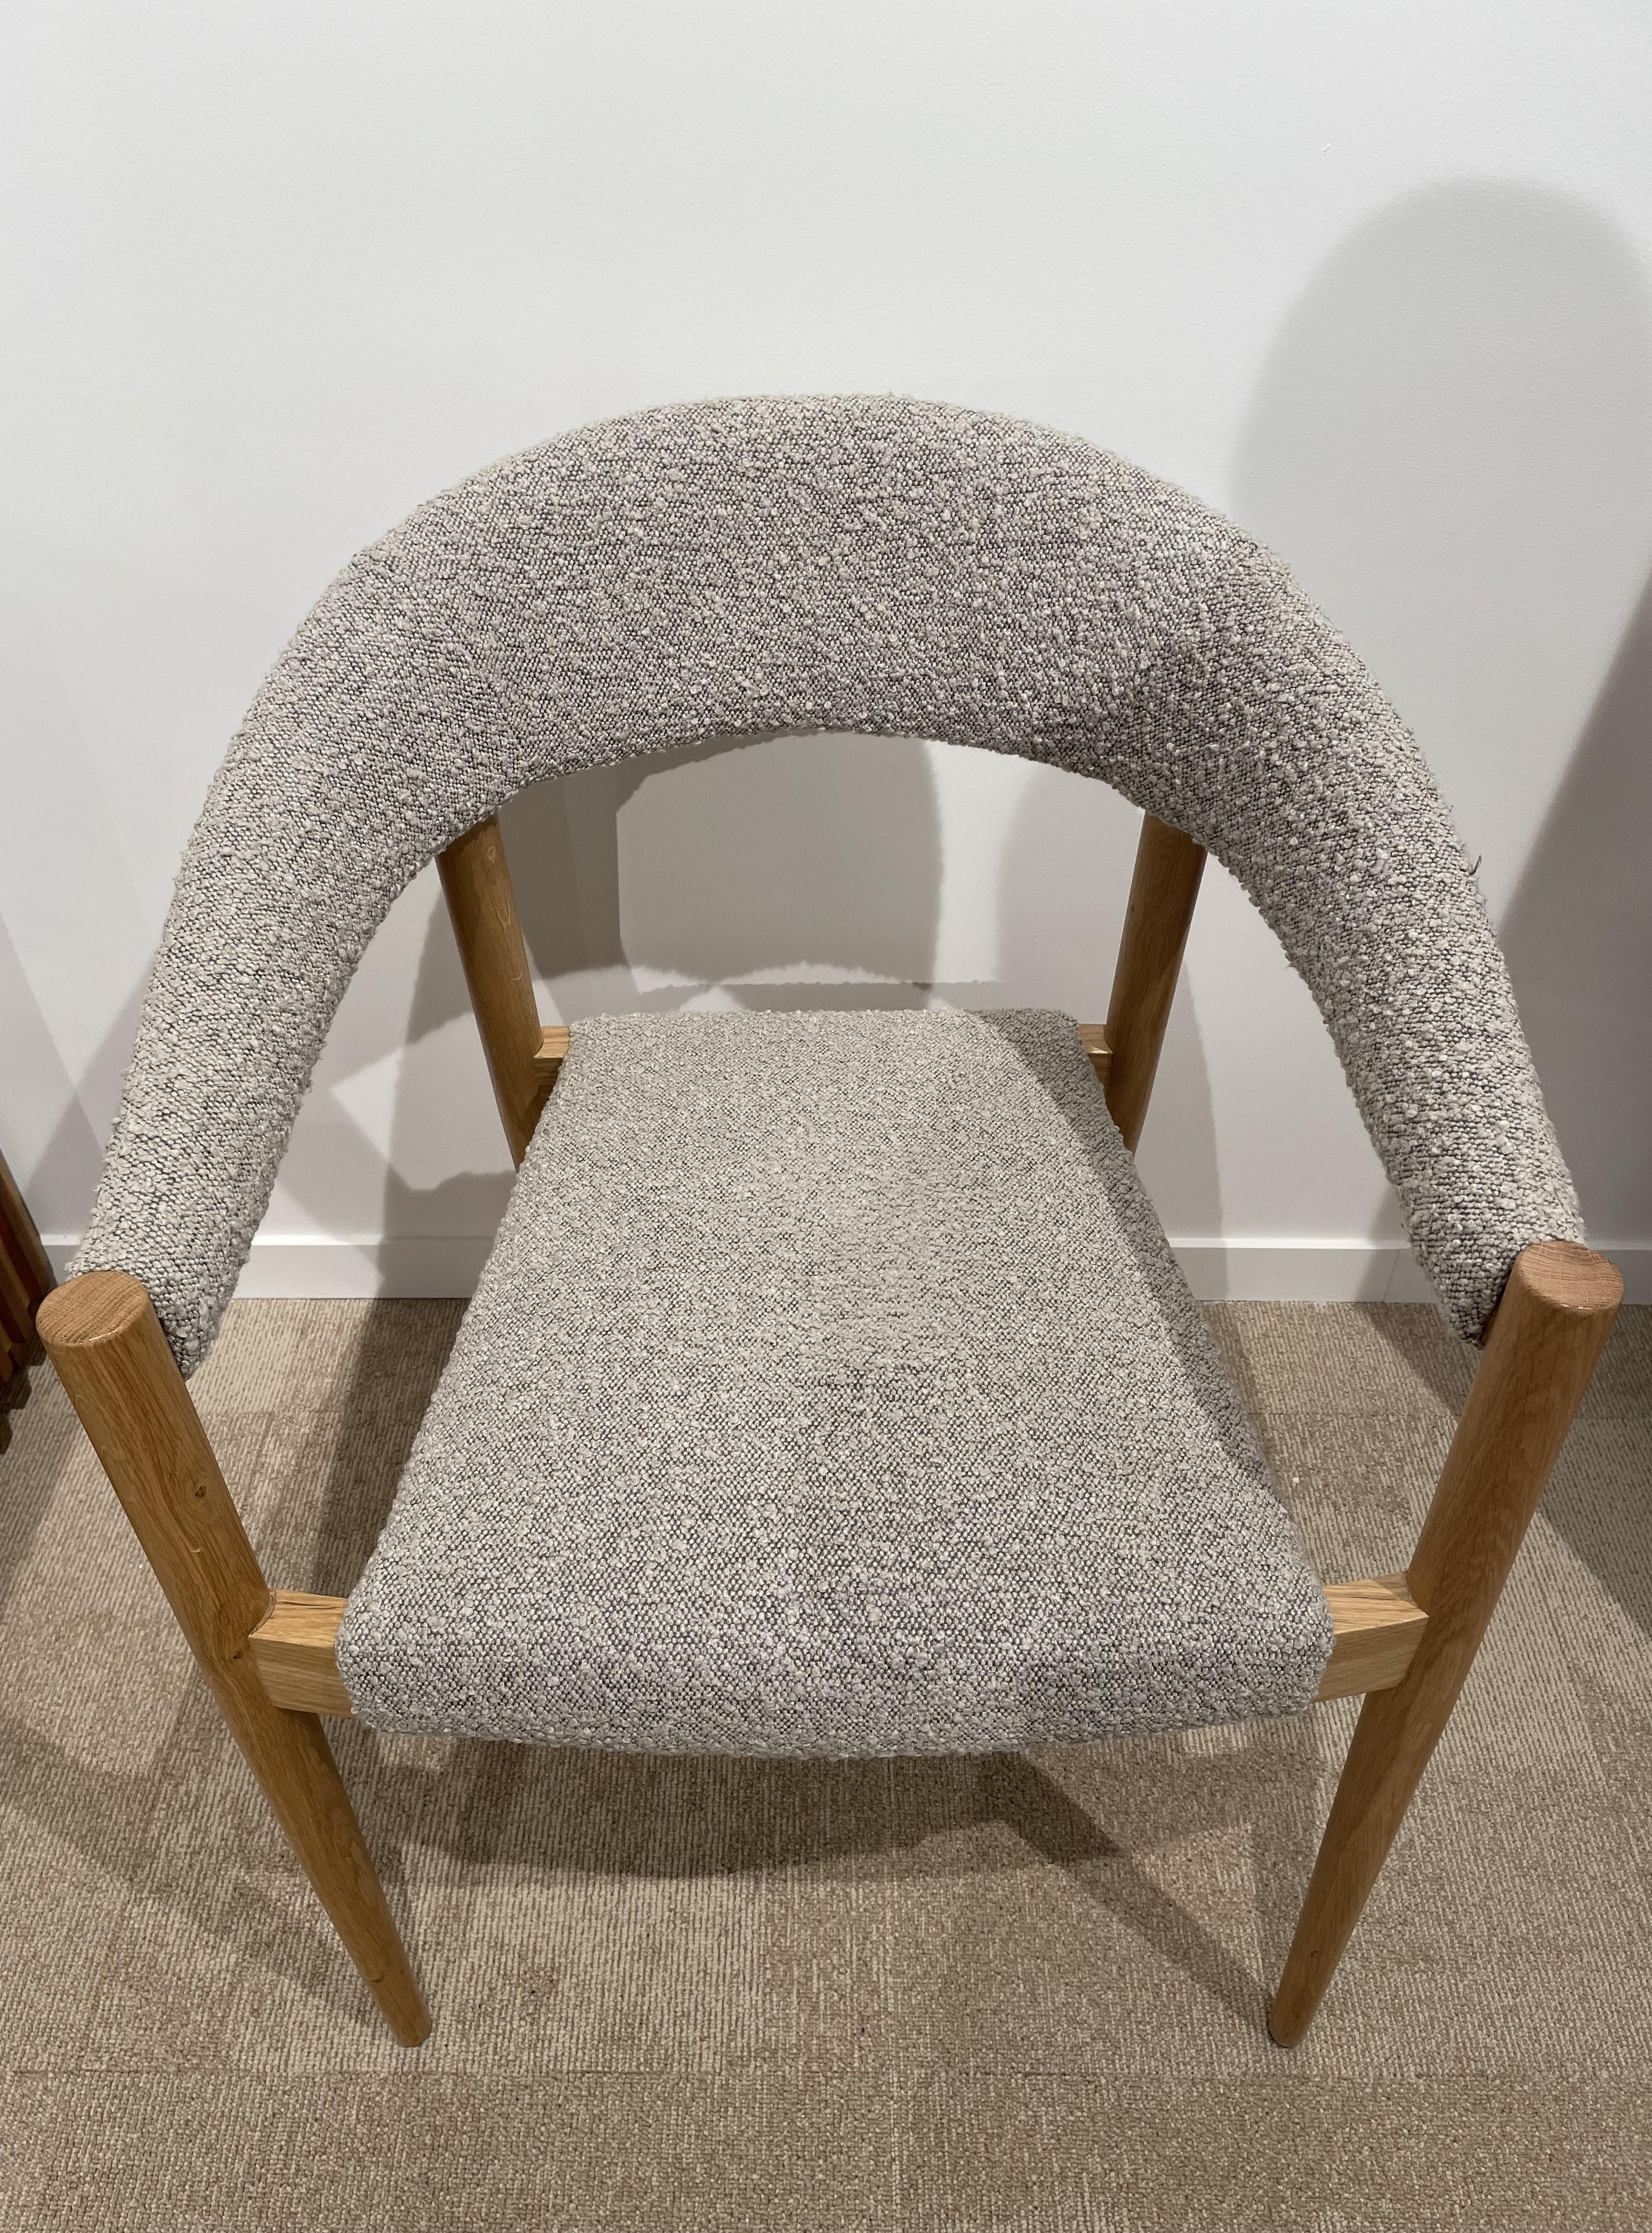 1960s Danish Design and Scandinavian Style Wooden and Bouclé Fabric Chair For Sale 7